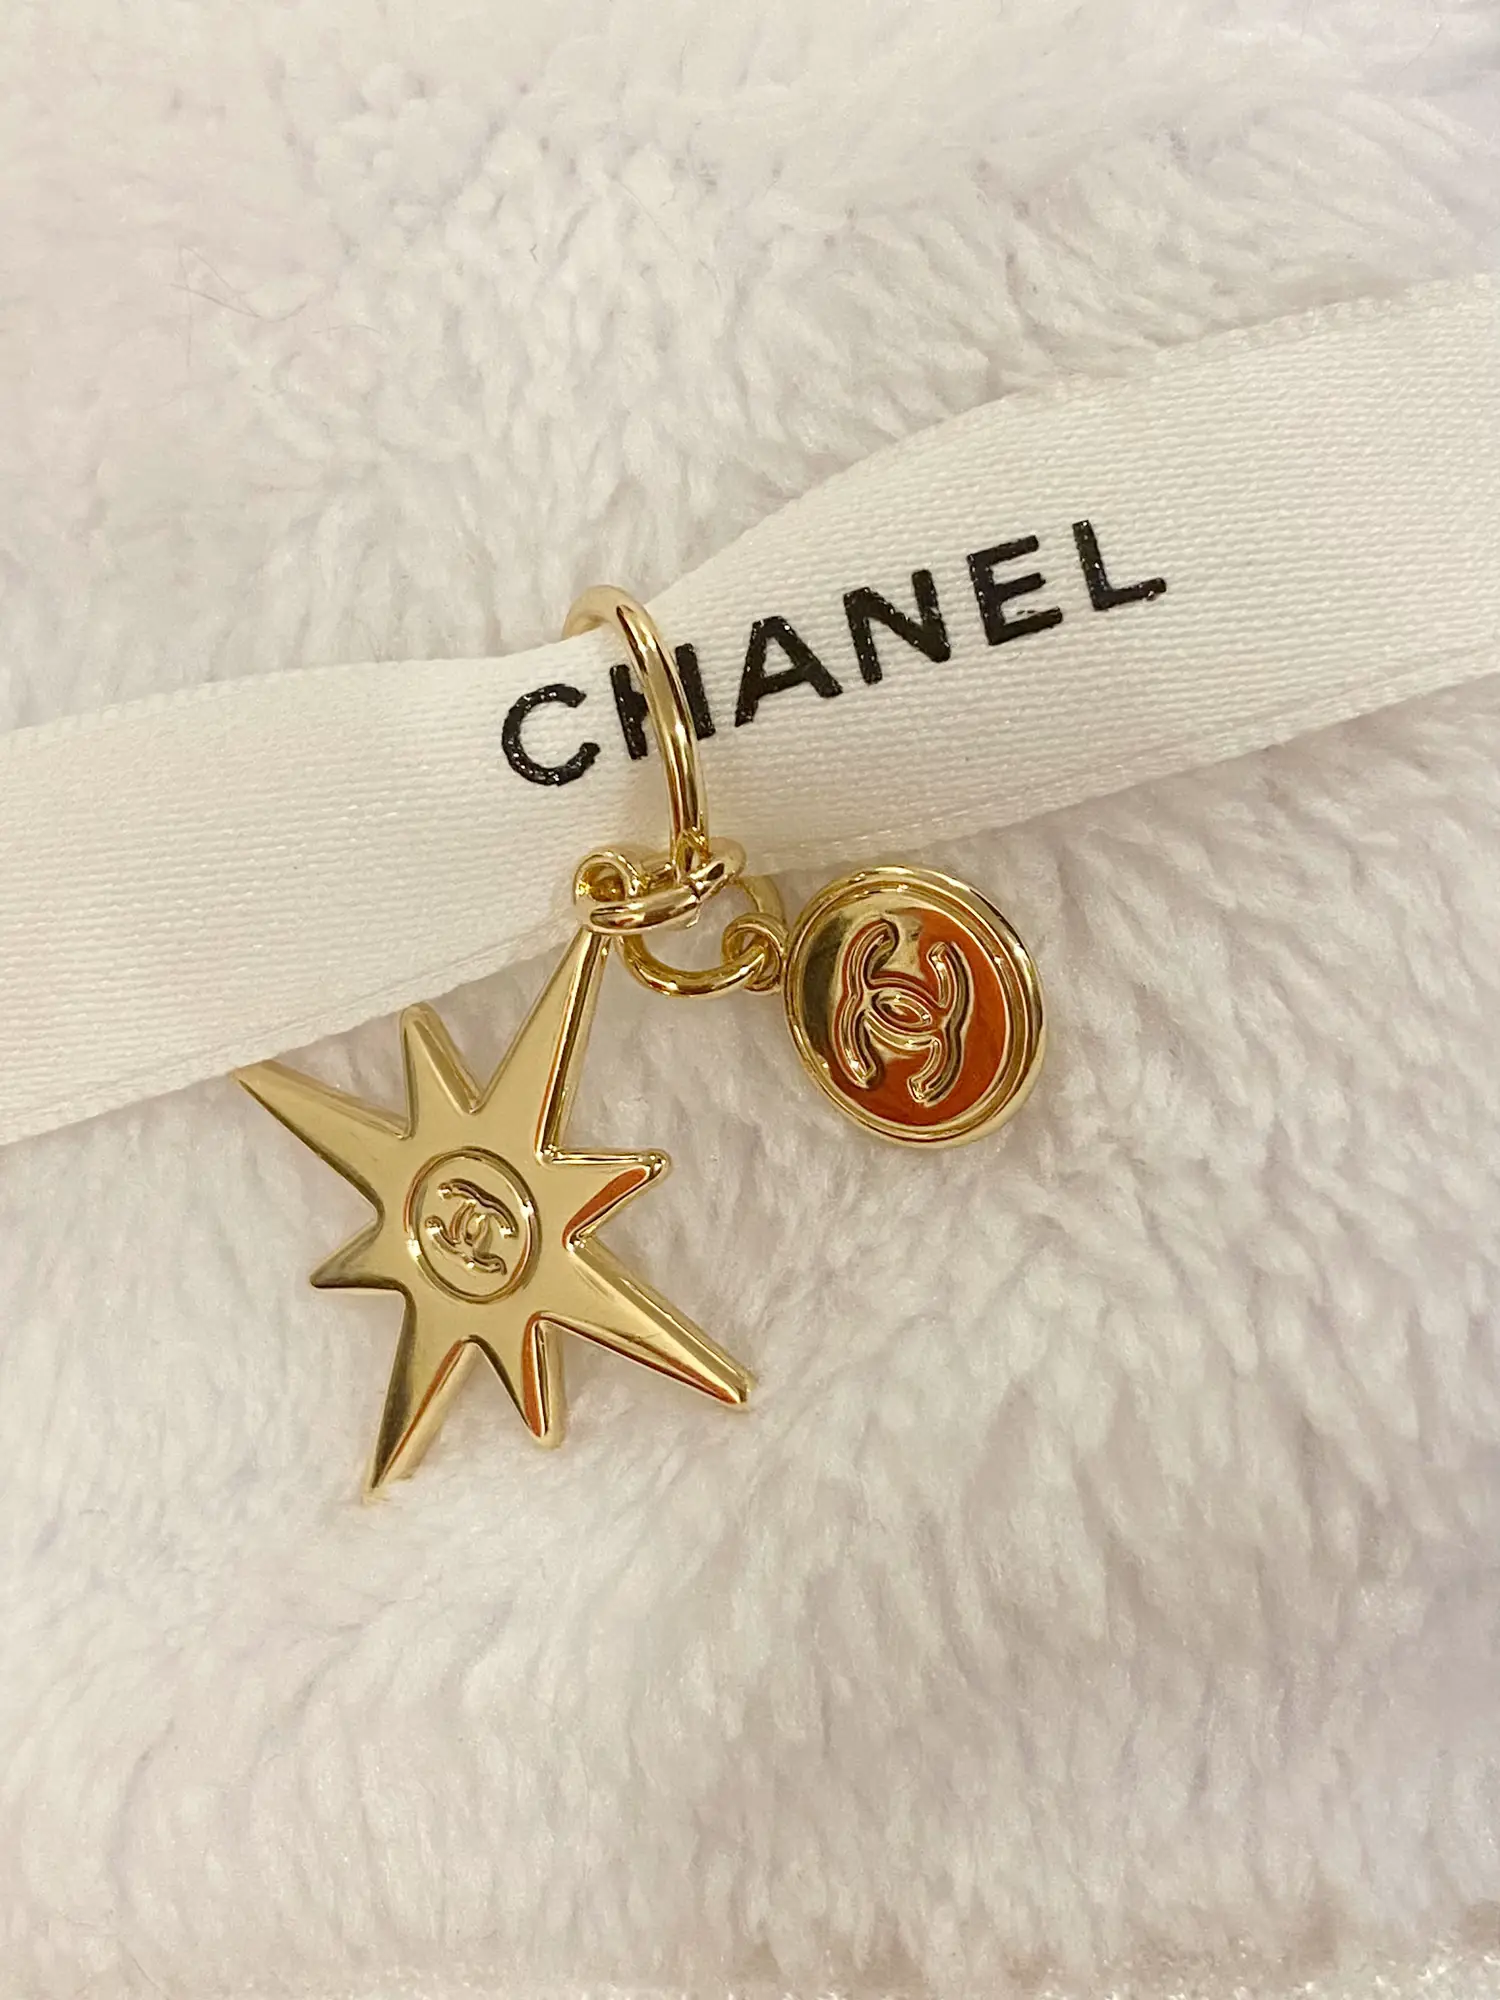 gold chanel diy charms